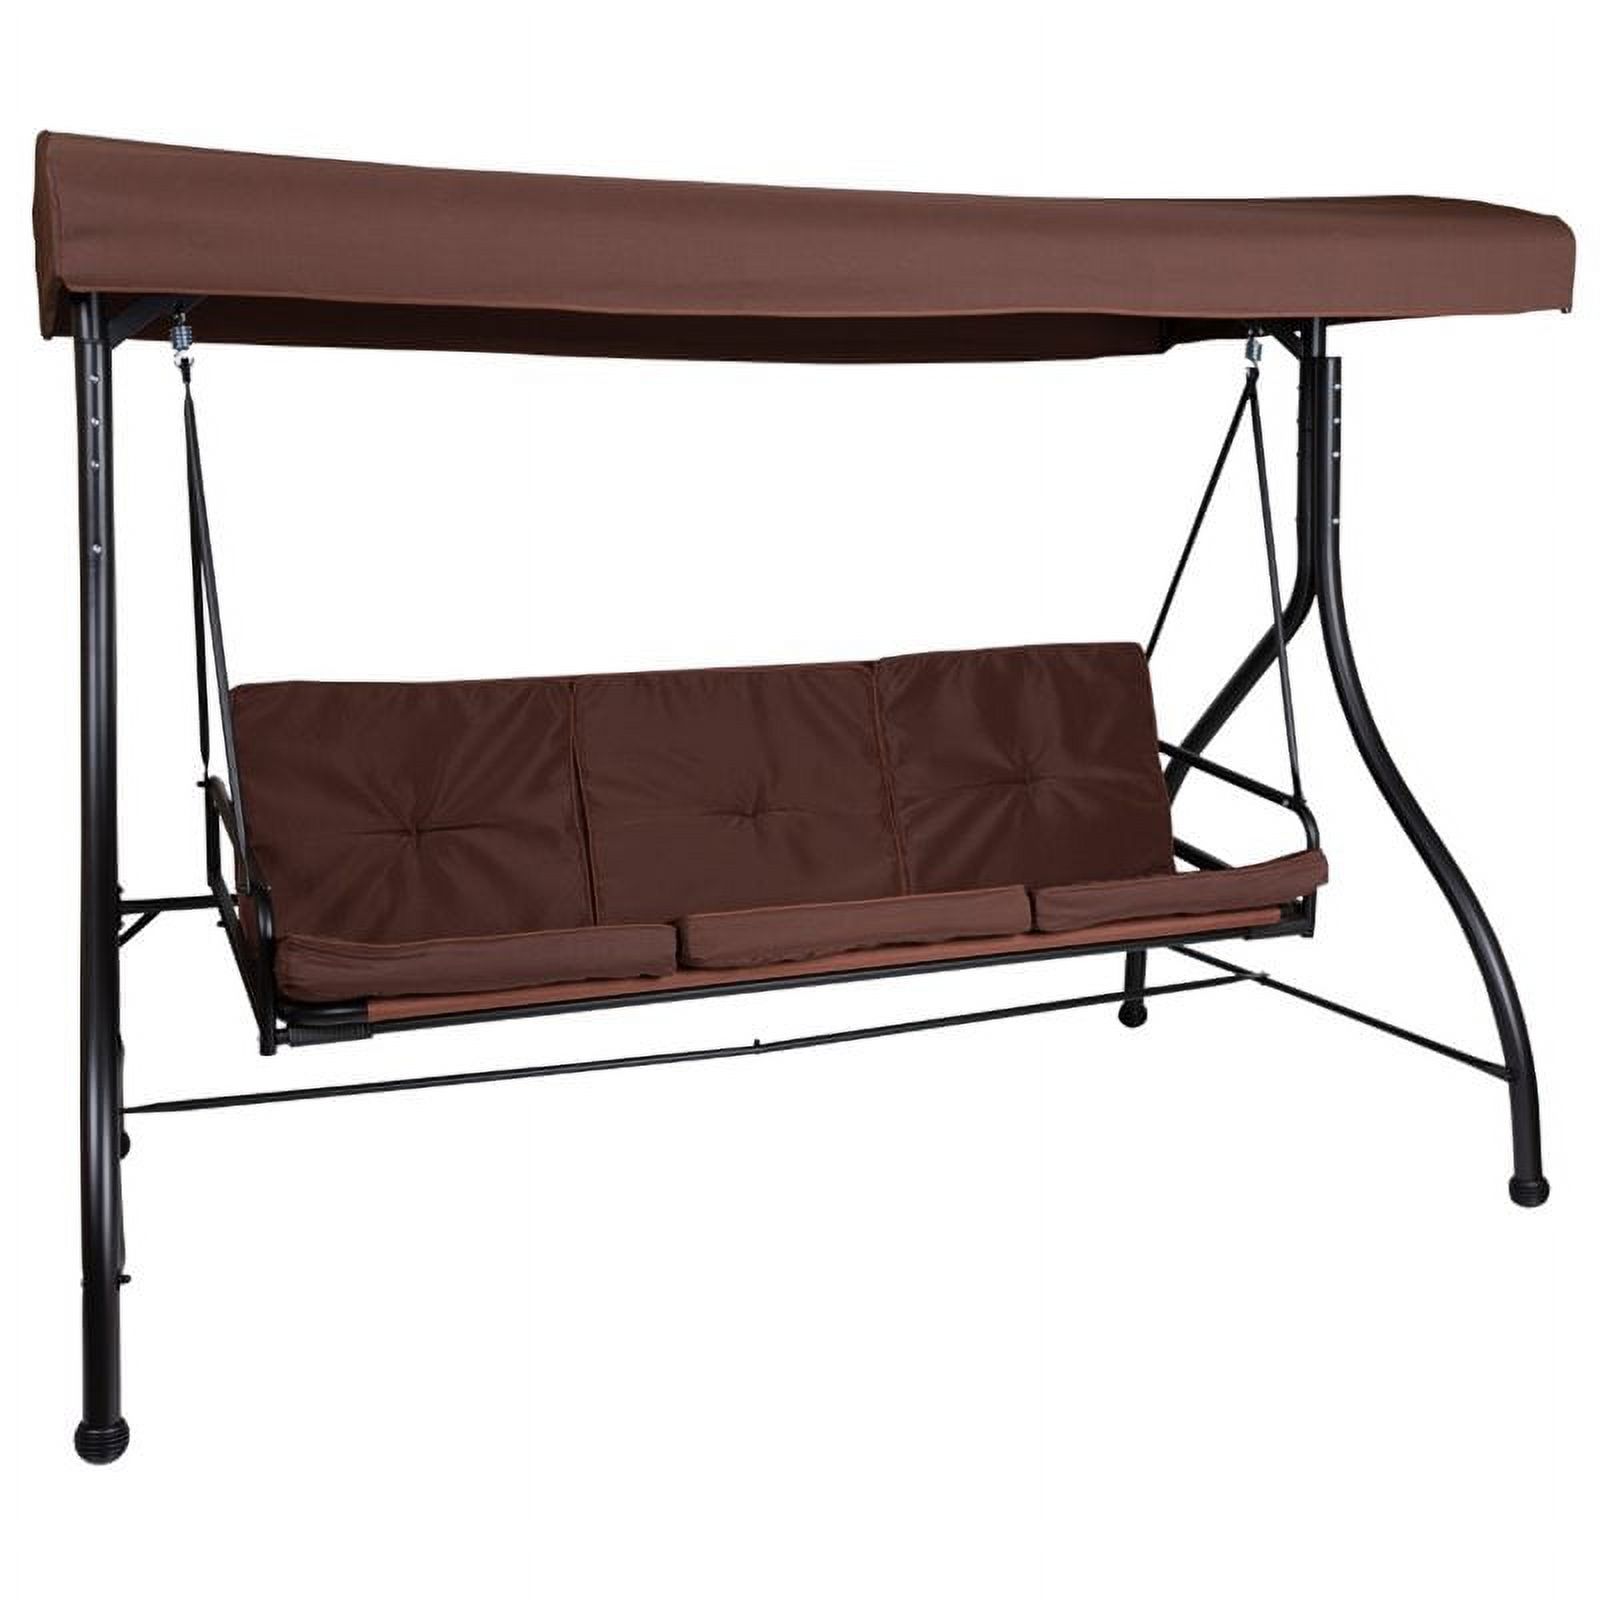 Afuera Living 3 Seat Patio Convertible Patio Swing and Hammock in Brown - image 1 of 12